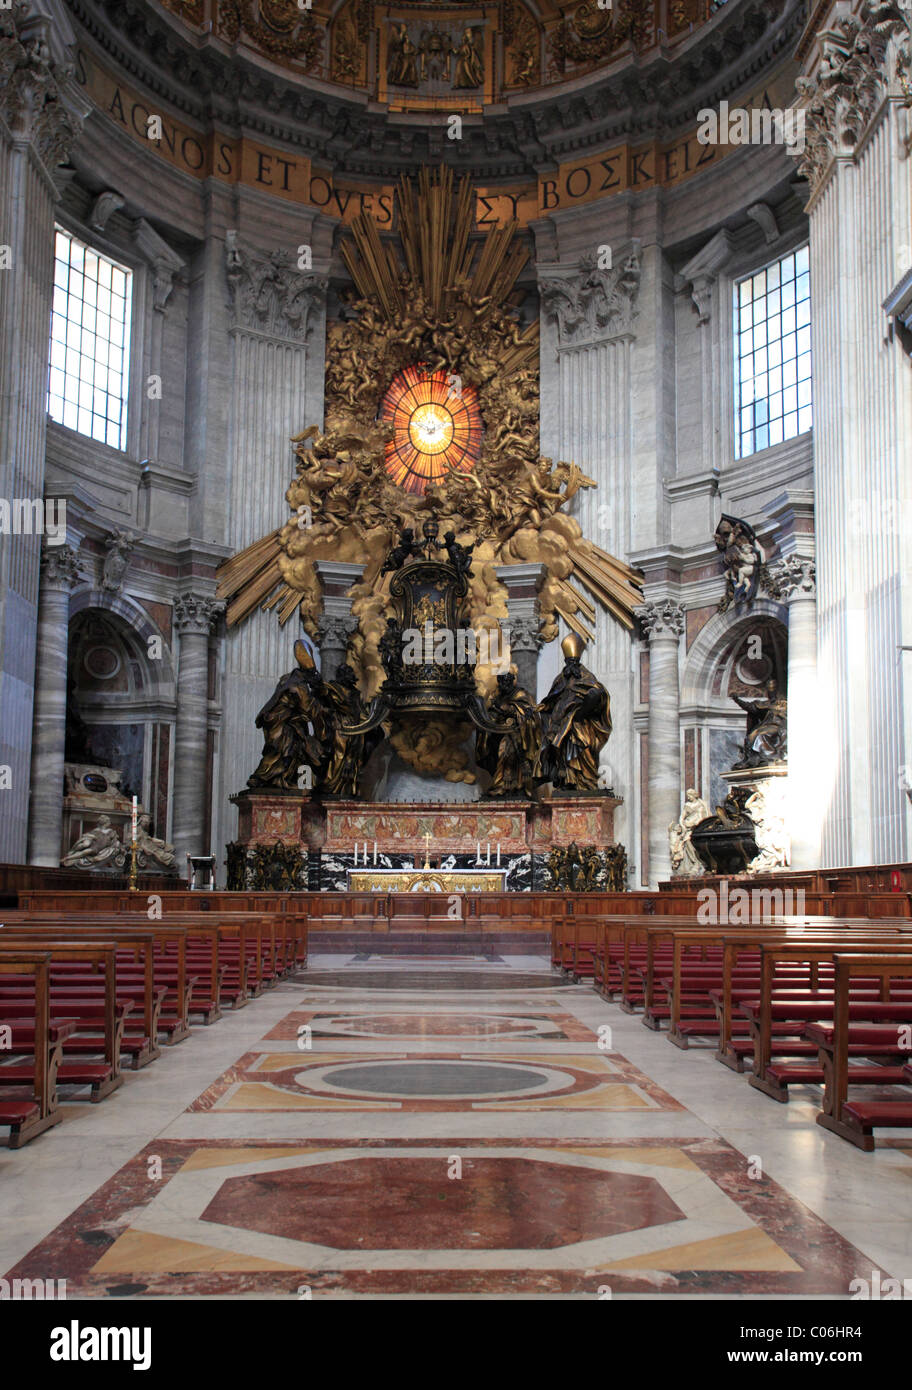 Altar in St. Peter's Basilica, Vatican City, Rome, Italy, Europa Stock Photo